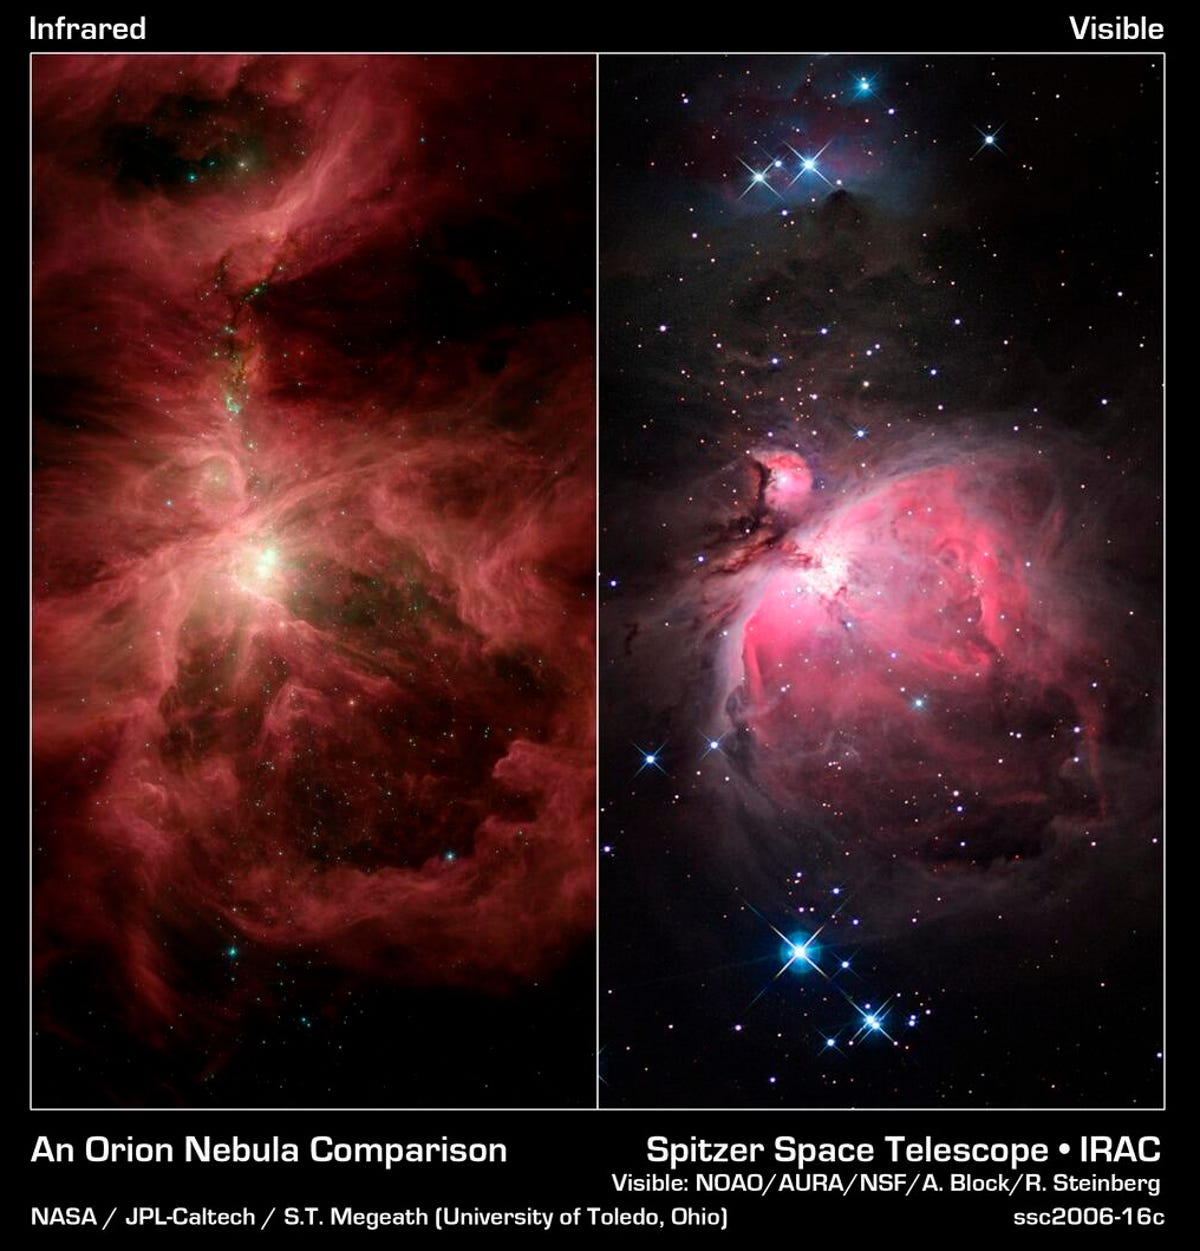 A comparison of the vivid Orion nebula in infrared and non-infrared views.